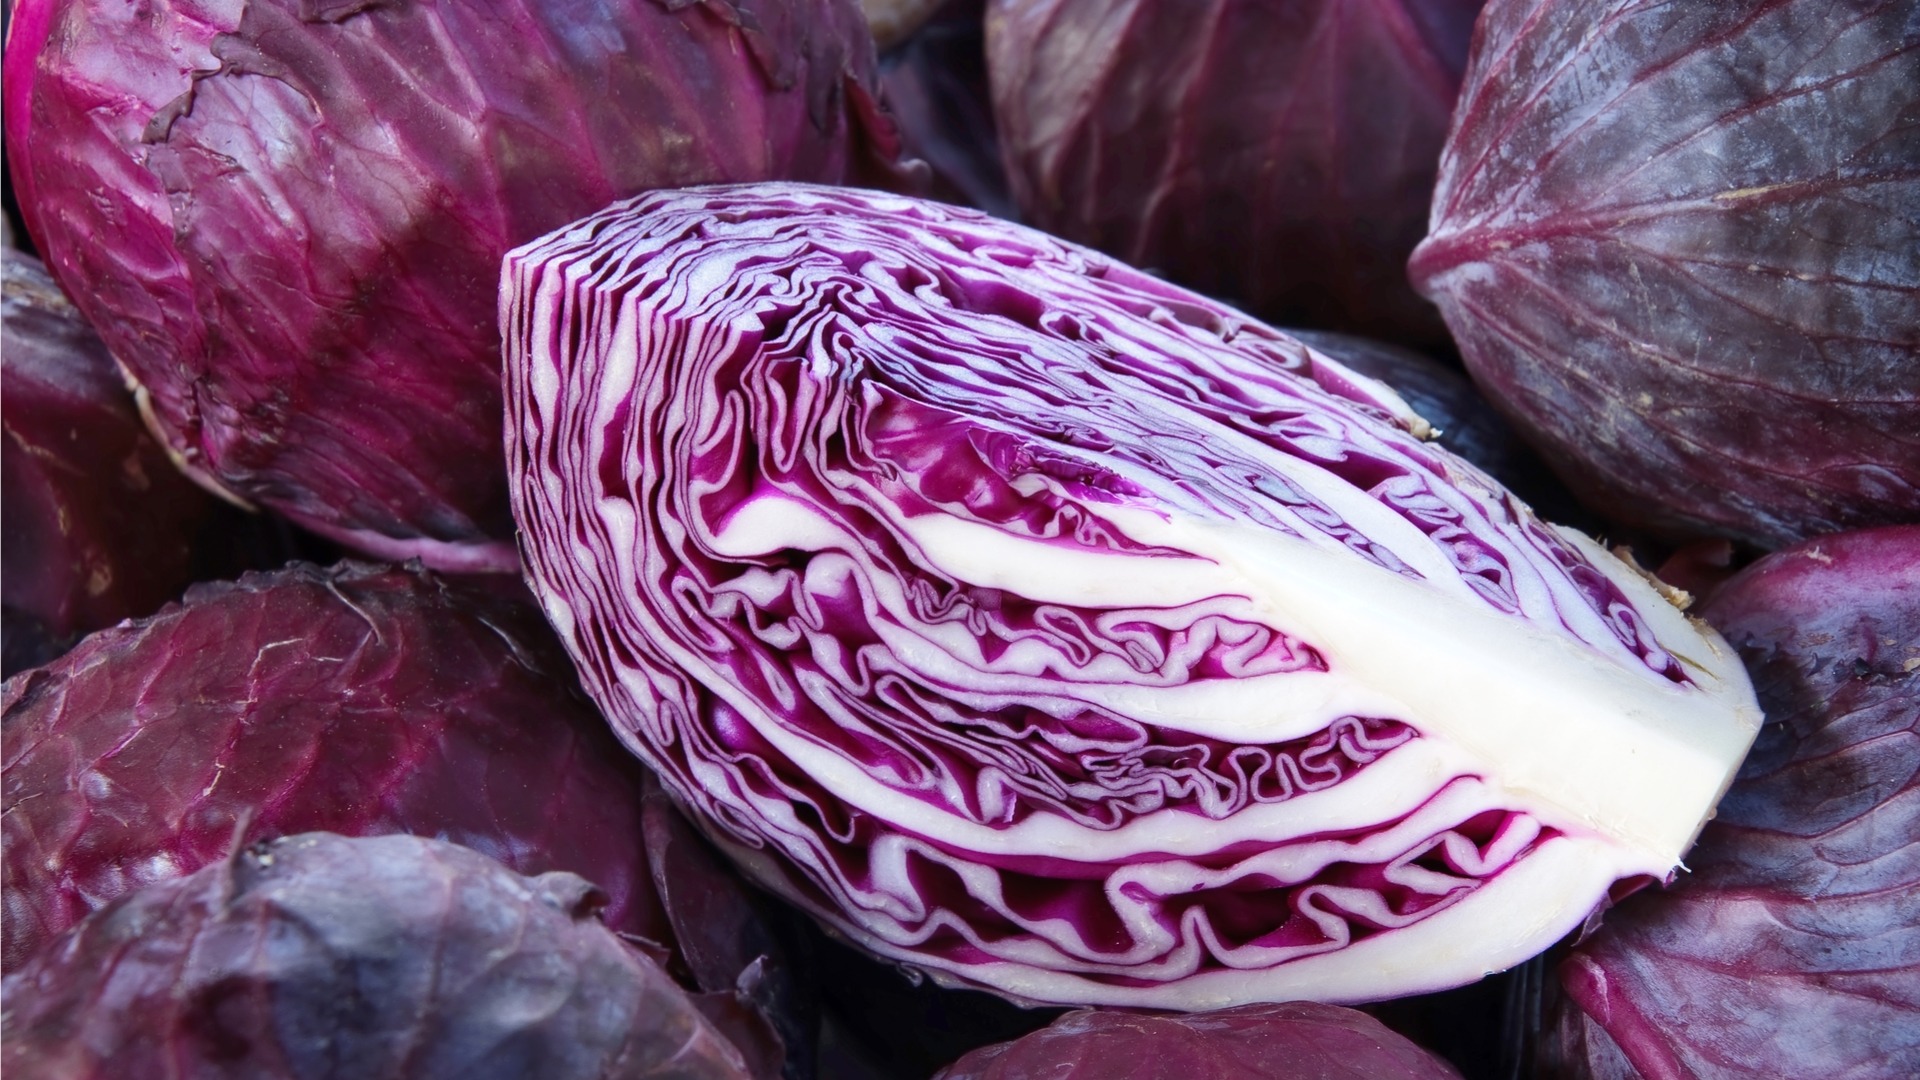 Cabbage: Red